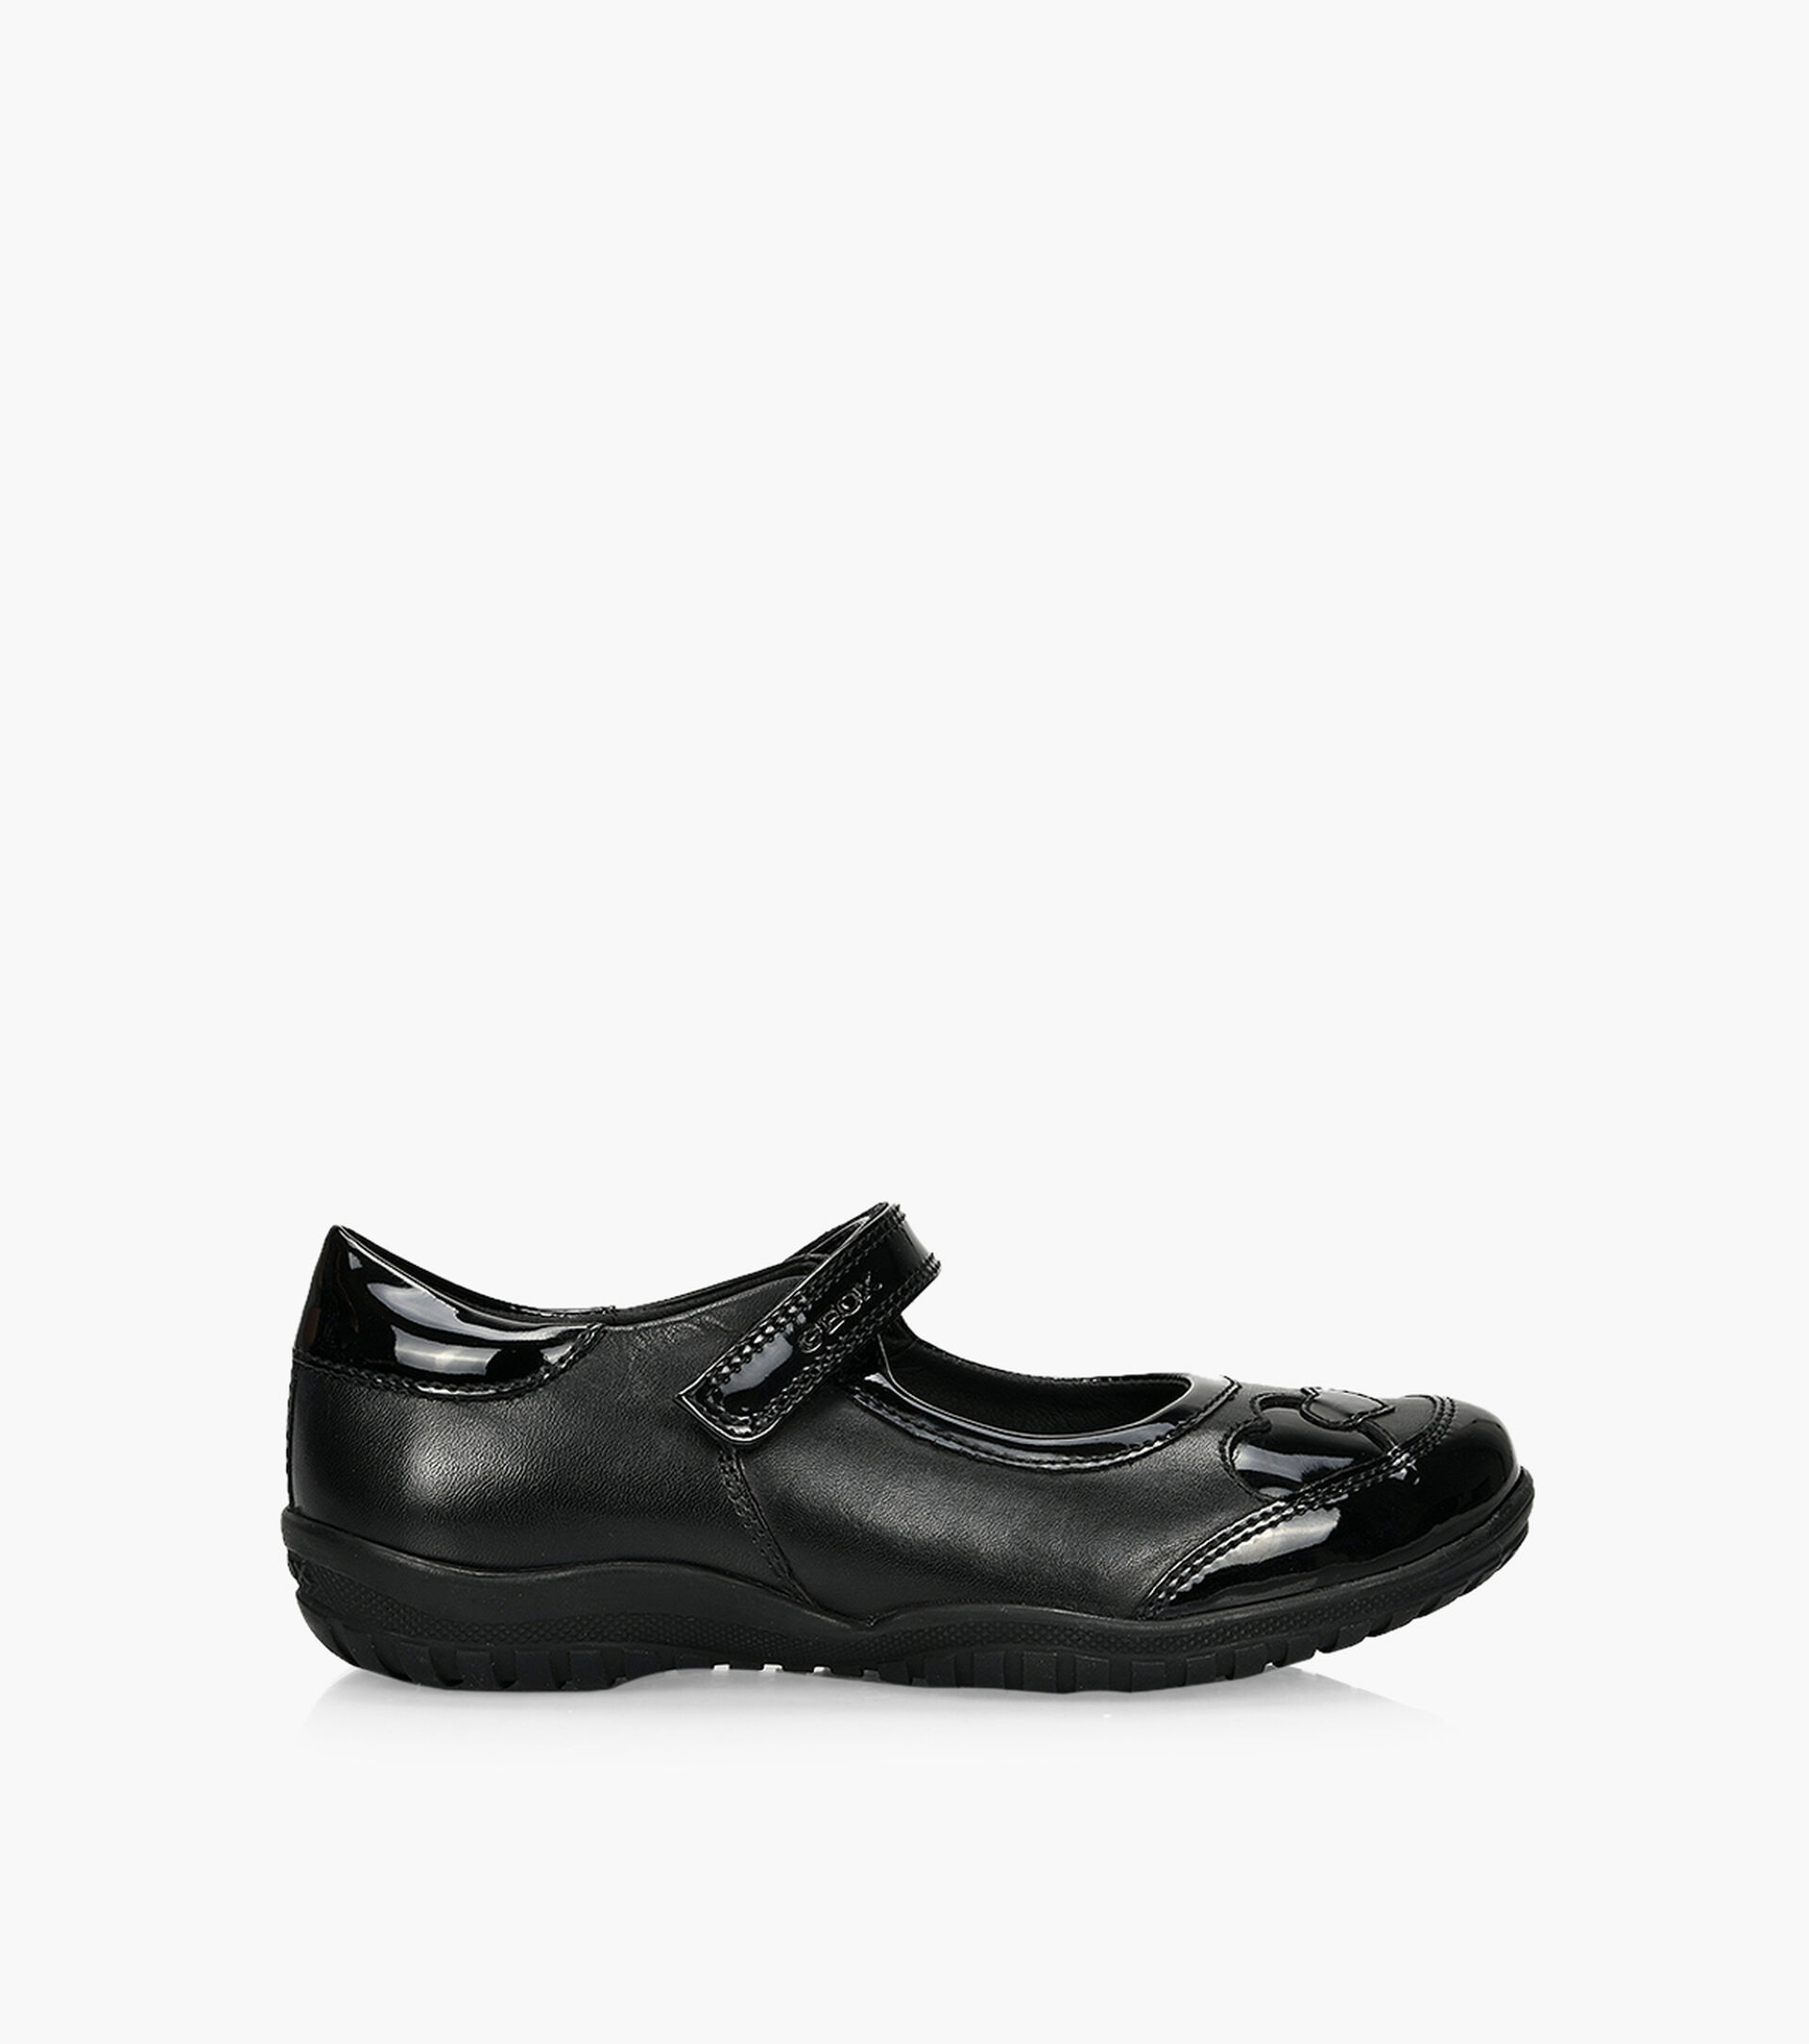 GEOX JR SHADOW - Black Leather | Browns Shoes